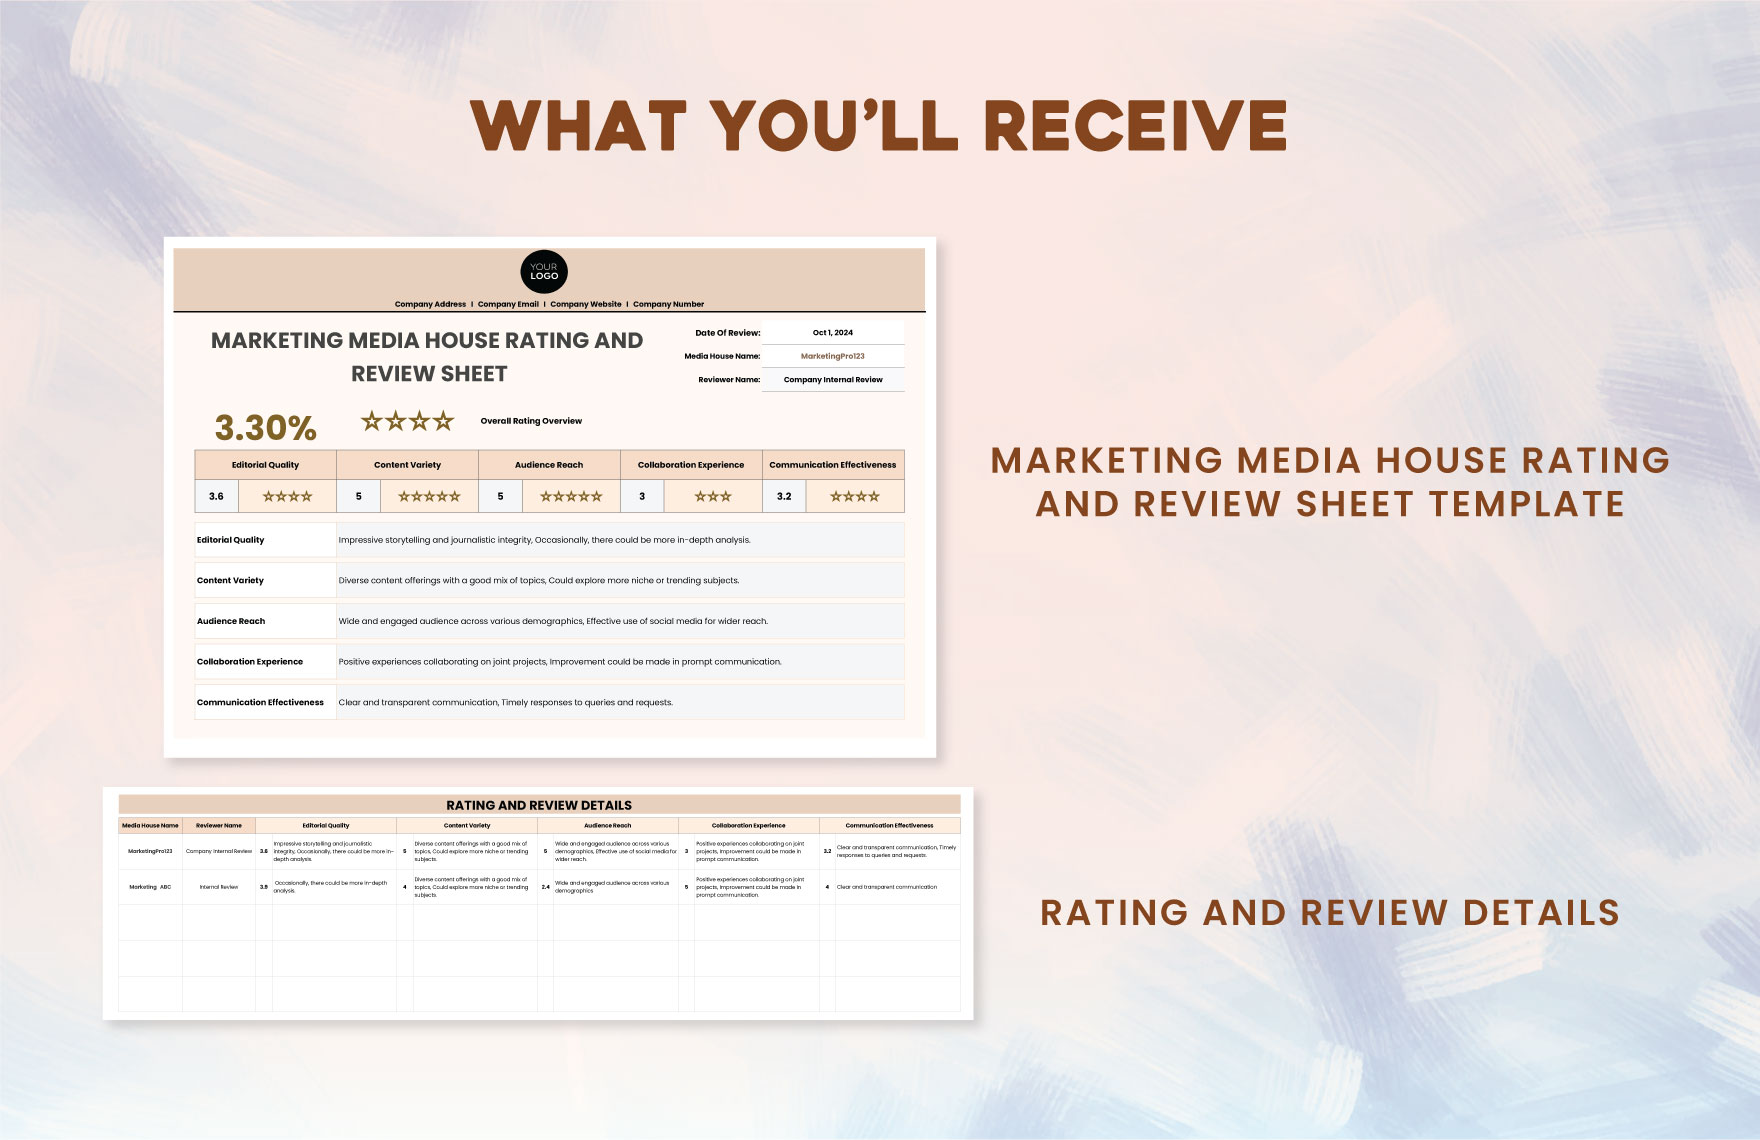 Marketing Media House Rating and Review Sheet Template